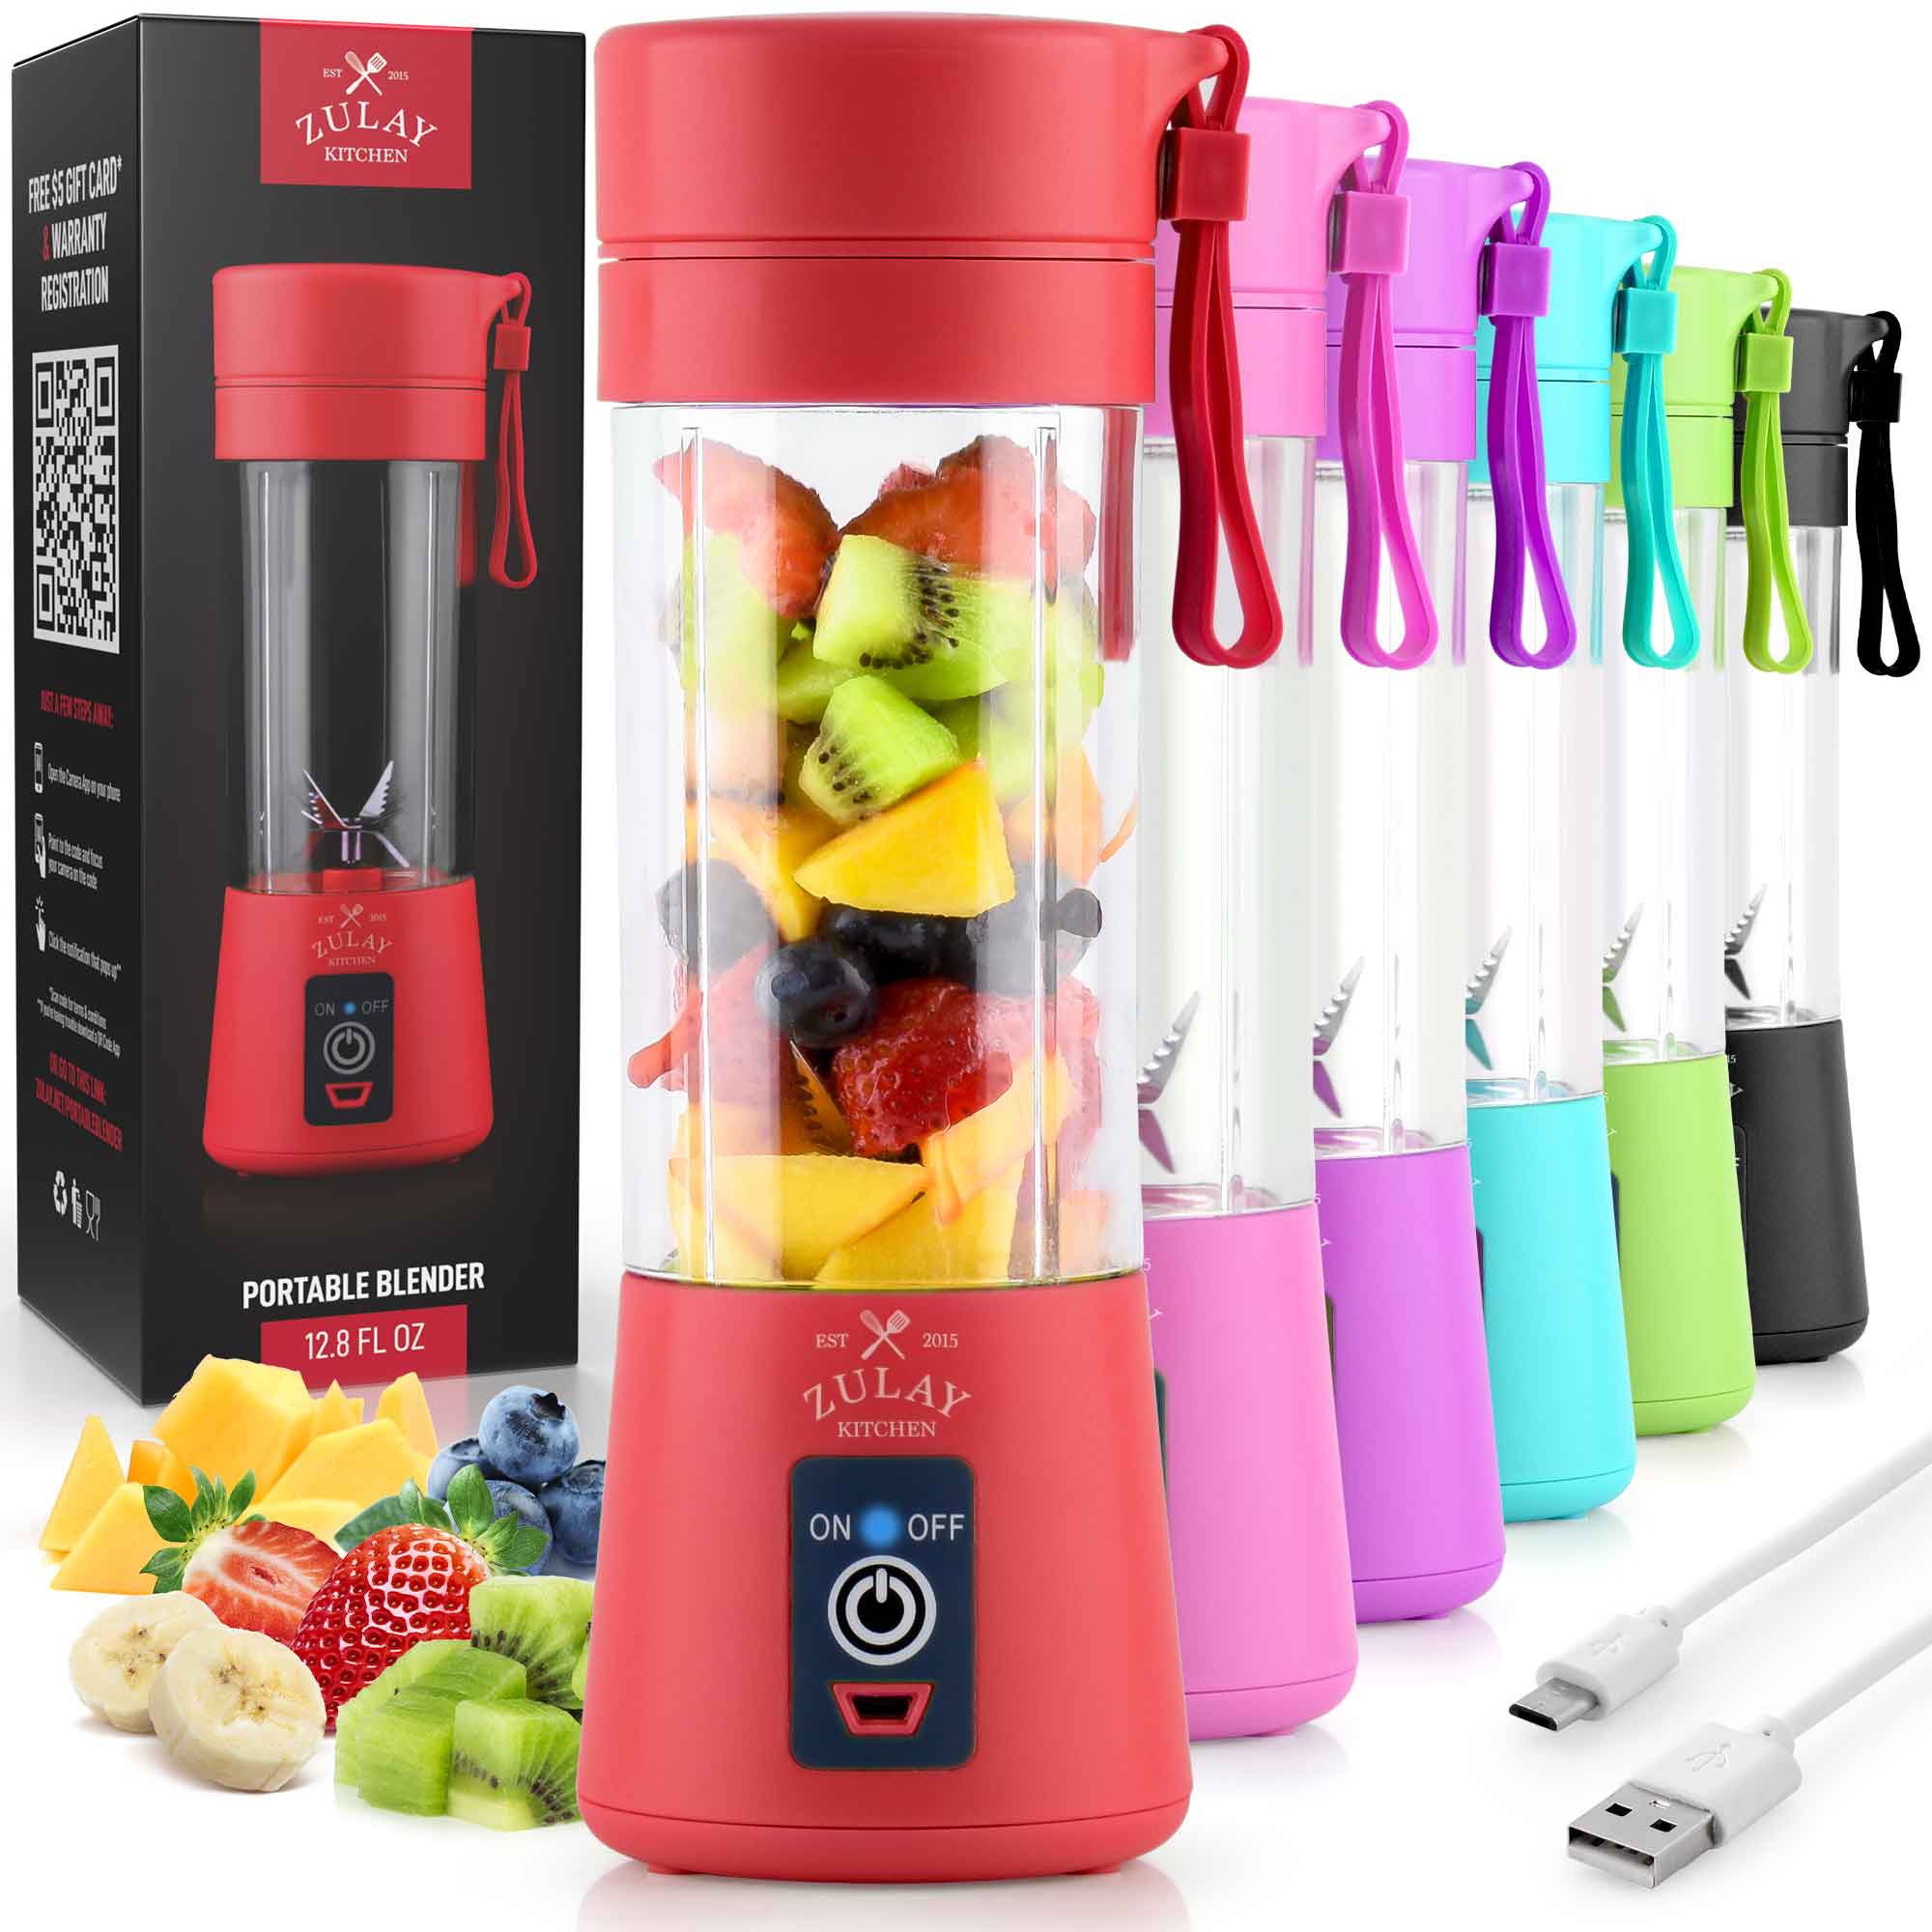 mischief evidence scald Portable Blender - USB Rechargeable Online | Zulay Kitchen - Save Big Today